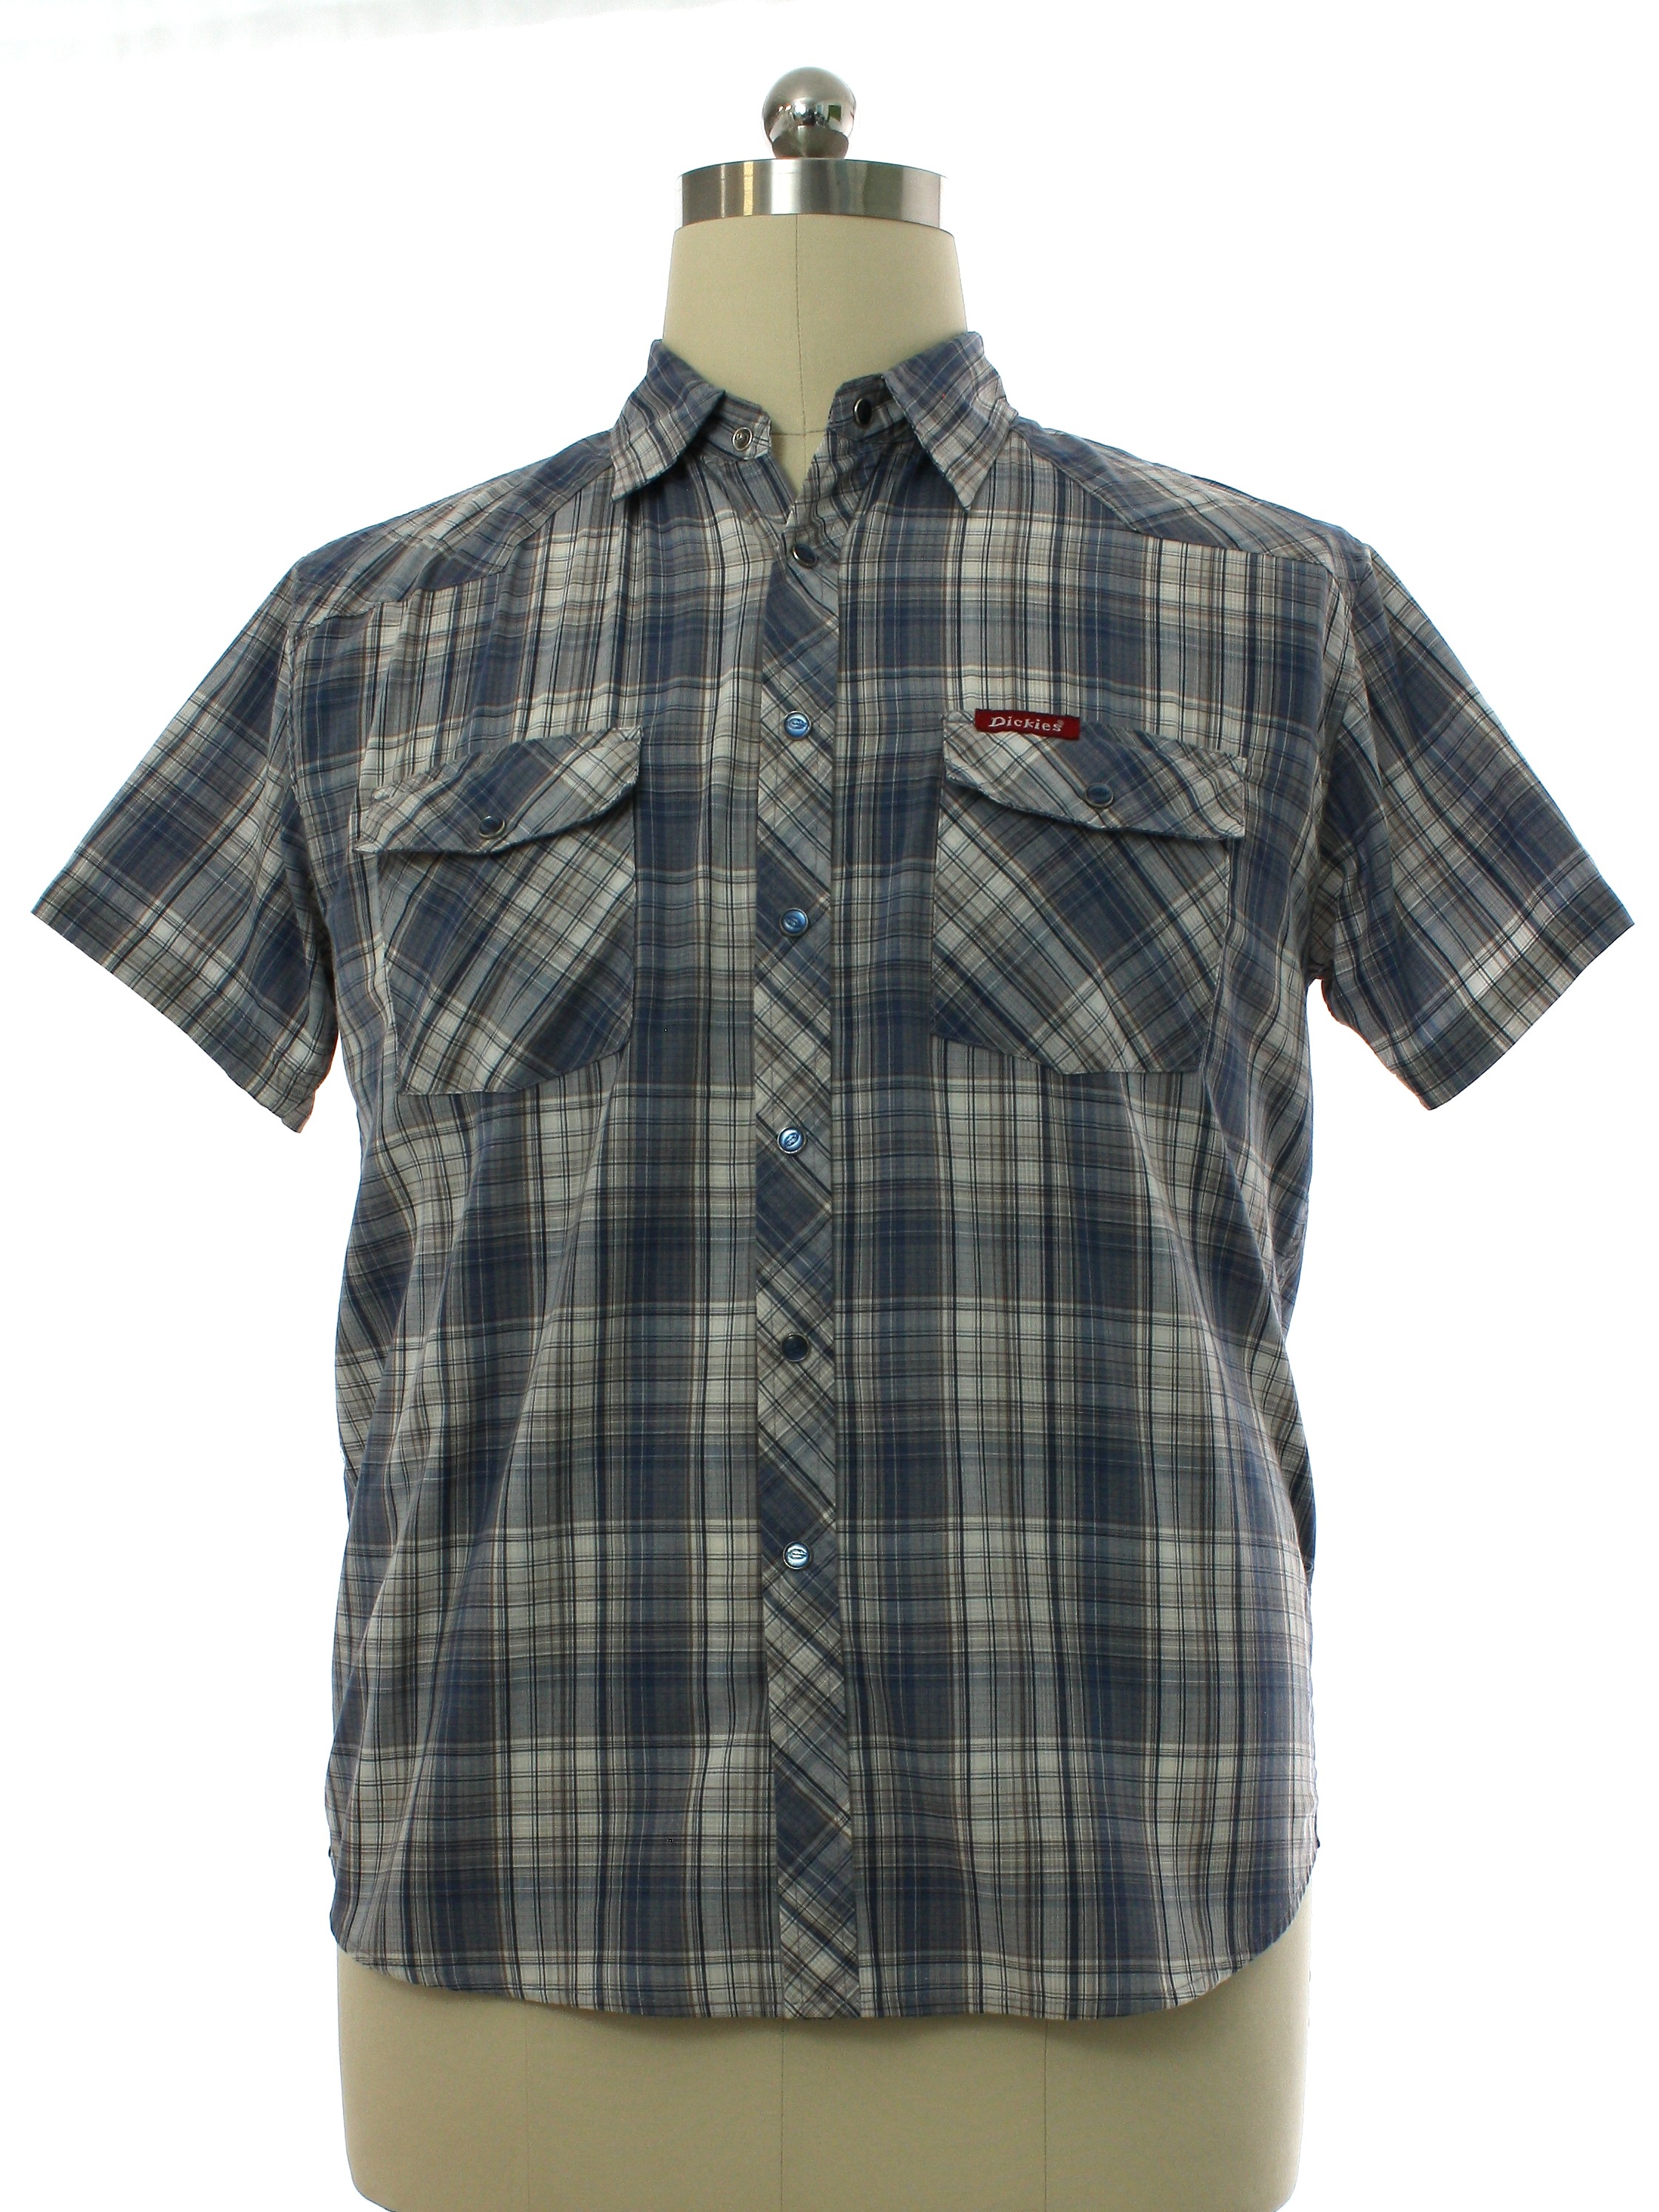 Western Shirt: 90s -Dickies- Mens dusty blue, white, and gray plaid ...